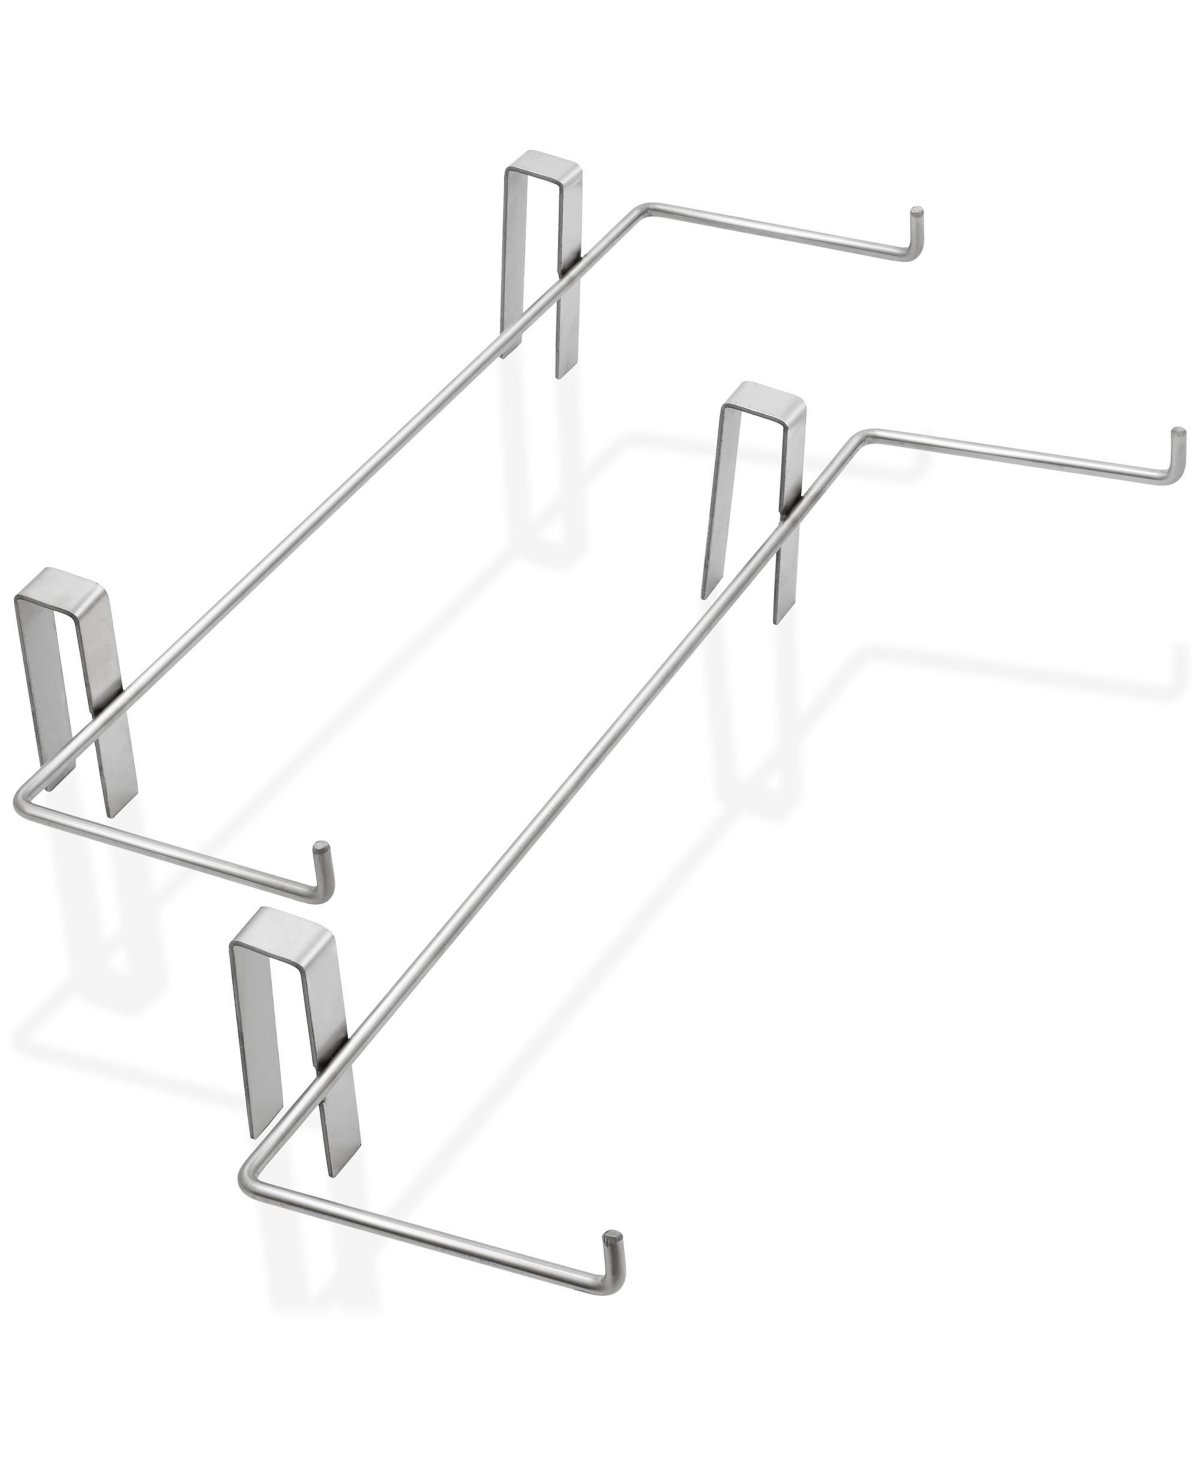 Beehive Frame Holder - Stainless Steel Hive Frame Hanger Perch, Pack of 2 - Silver